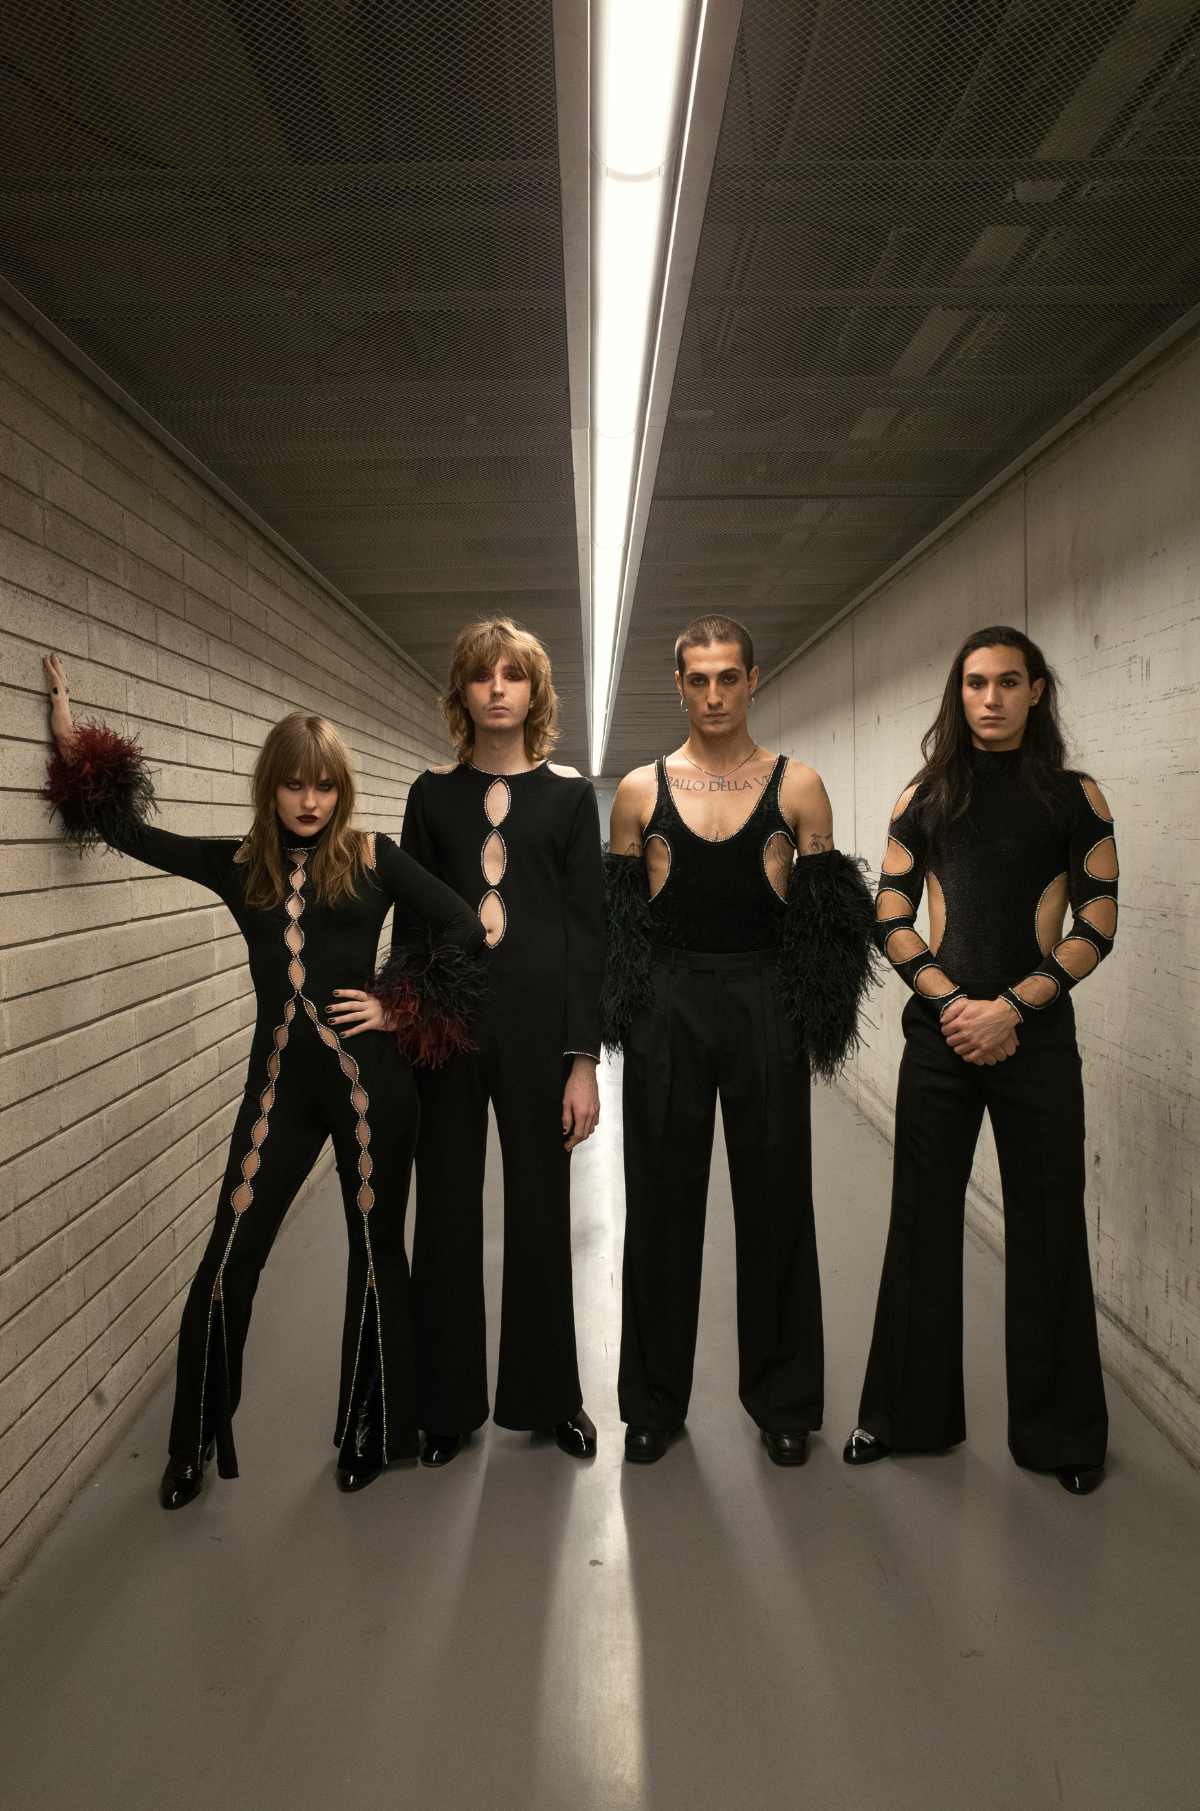 Maneskin In Gucci For Selected Dates Of Their “Loud Kids Tour” Throughout Europe